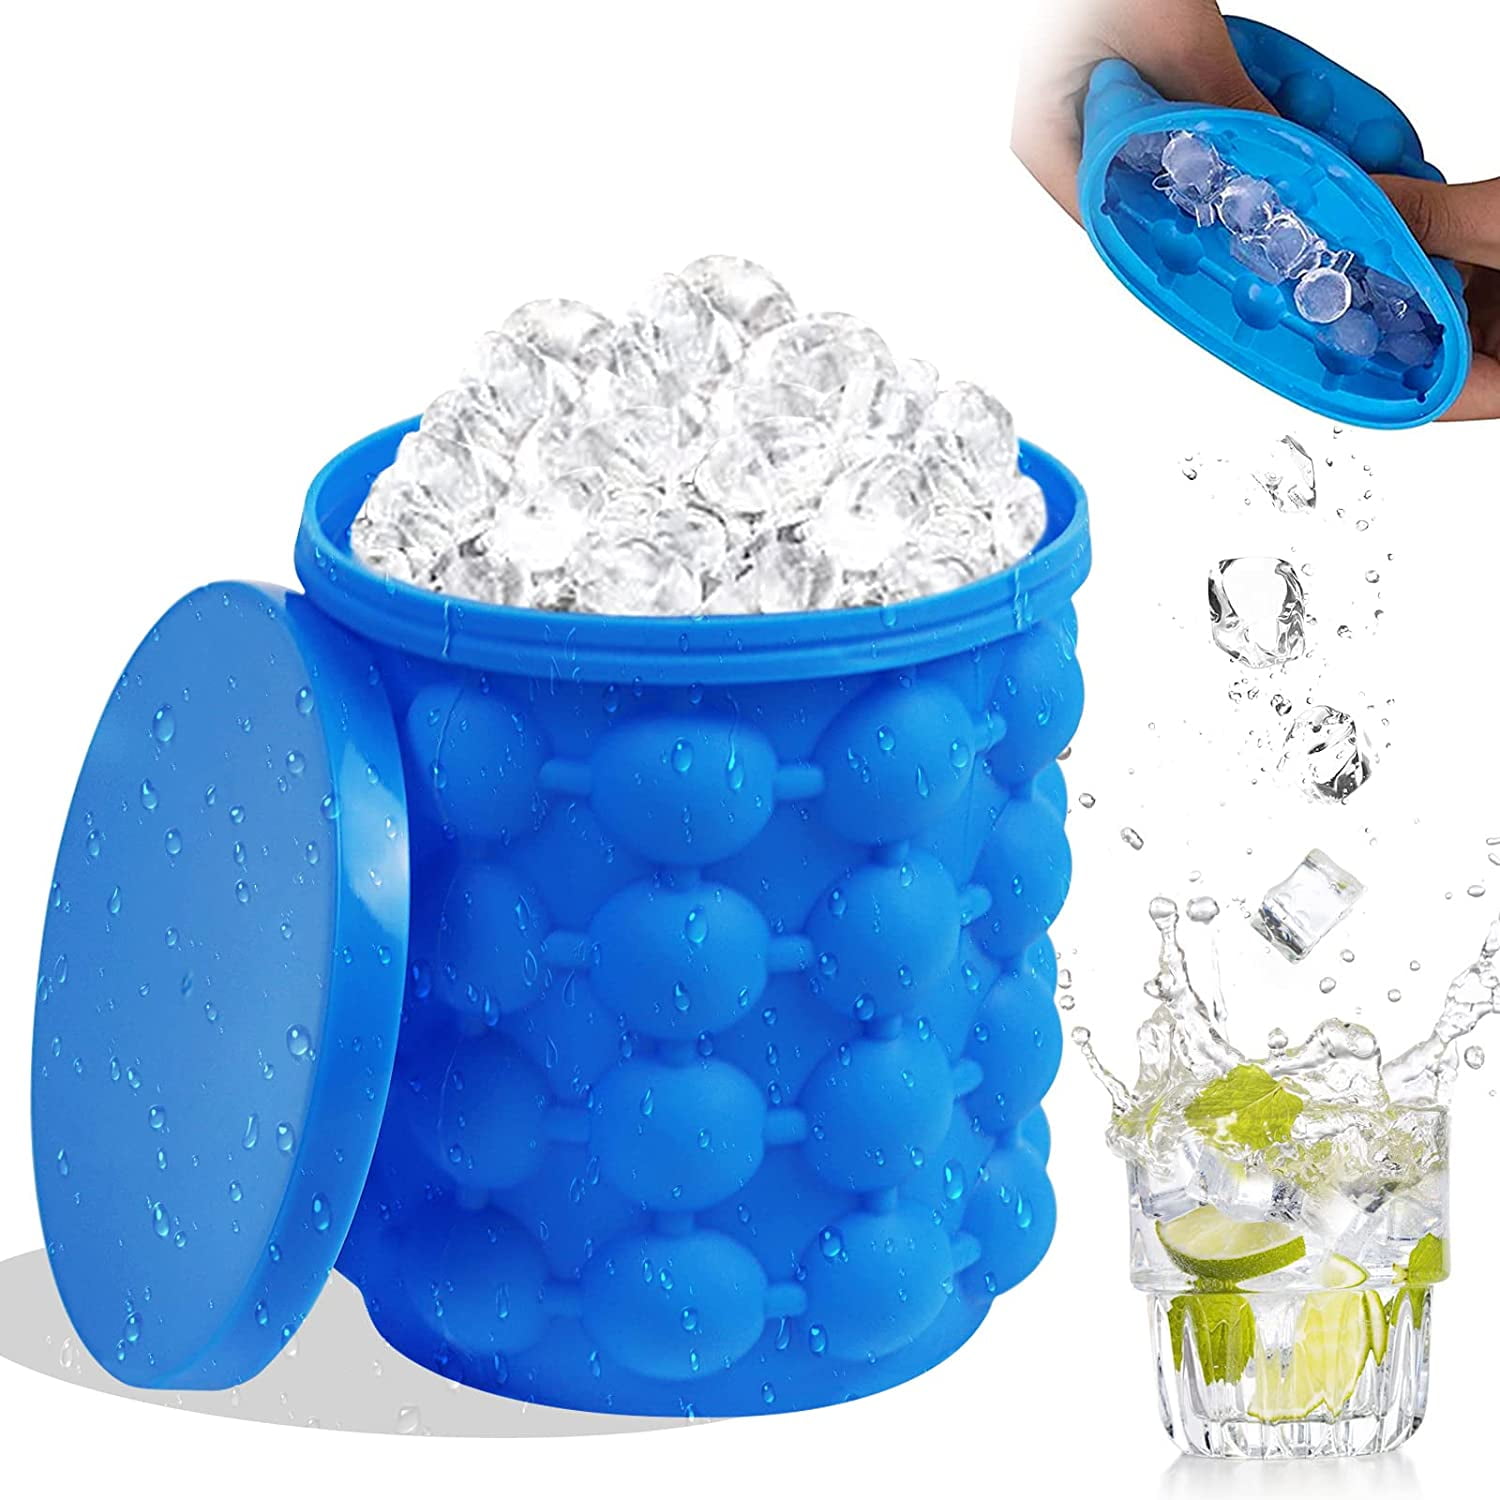 32cm Silicone Ice Mold With Easy Release One Click Fall Off Feature For  Breakfast Cocktails Ice Cubes Includes Storage Box From Smyy666, $17.66